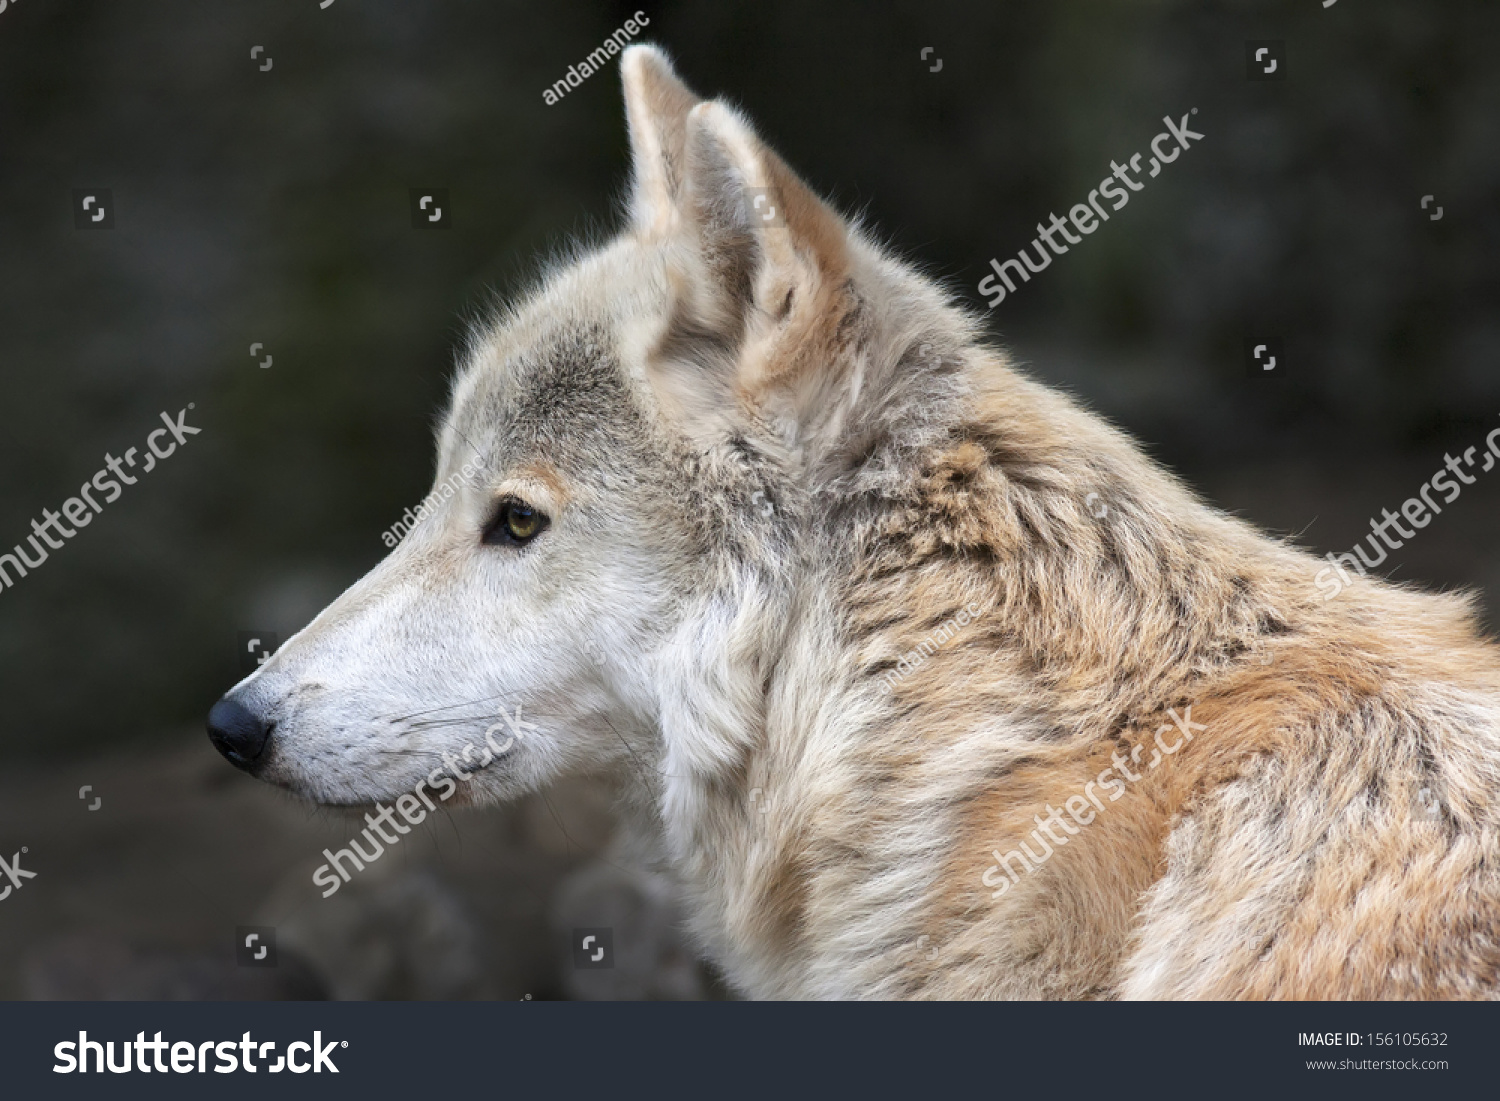 The Head And Neck Of A Polar Wolf Male. Eye To Eye With The Very ...